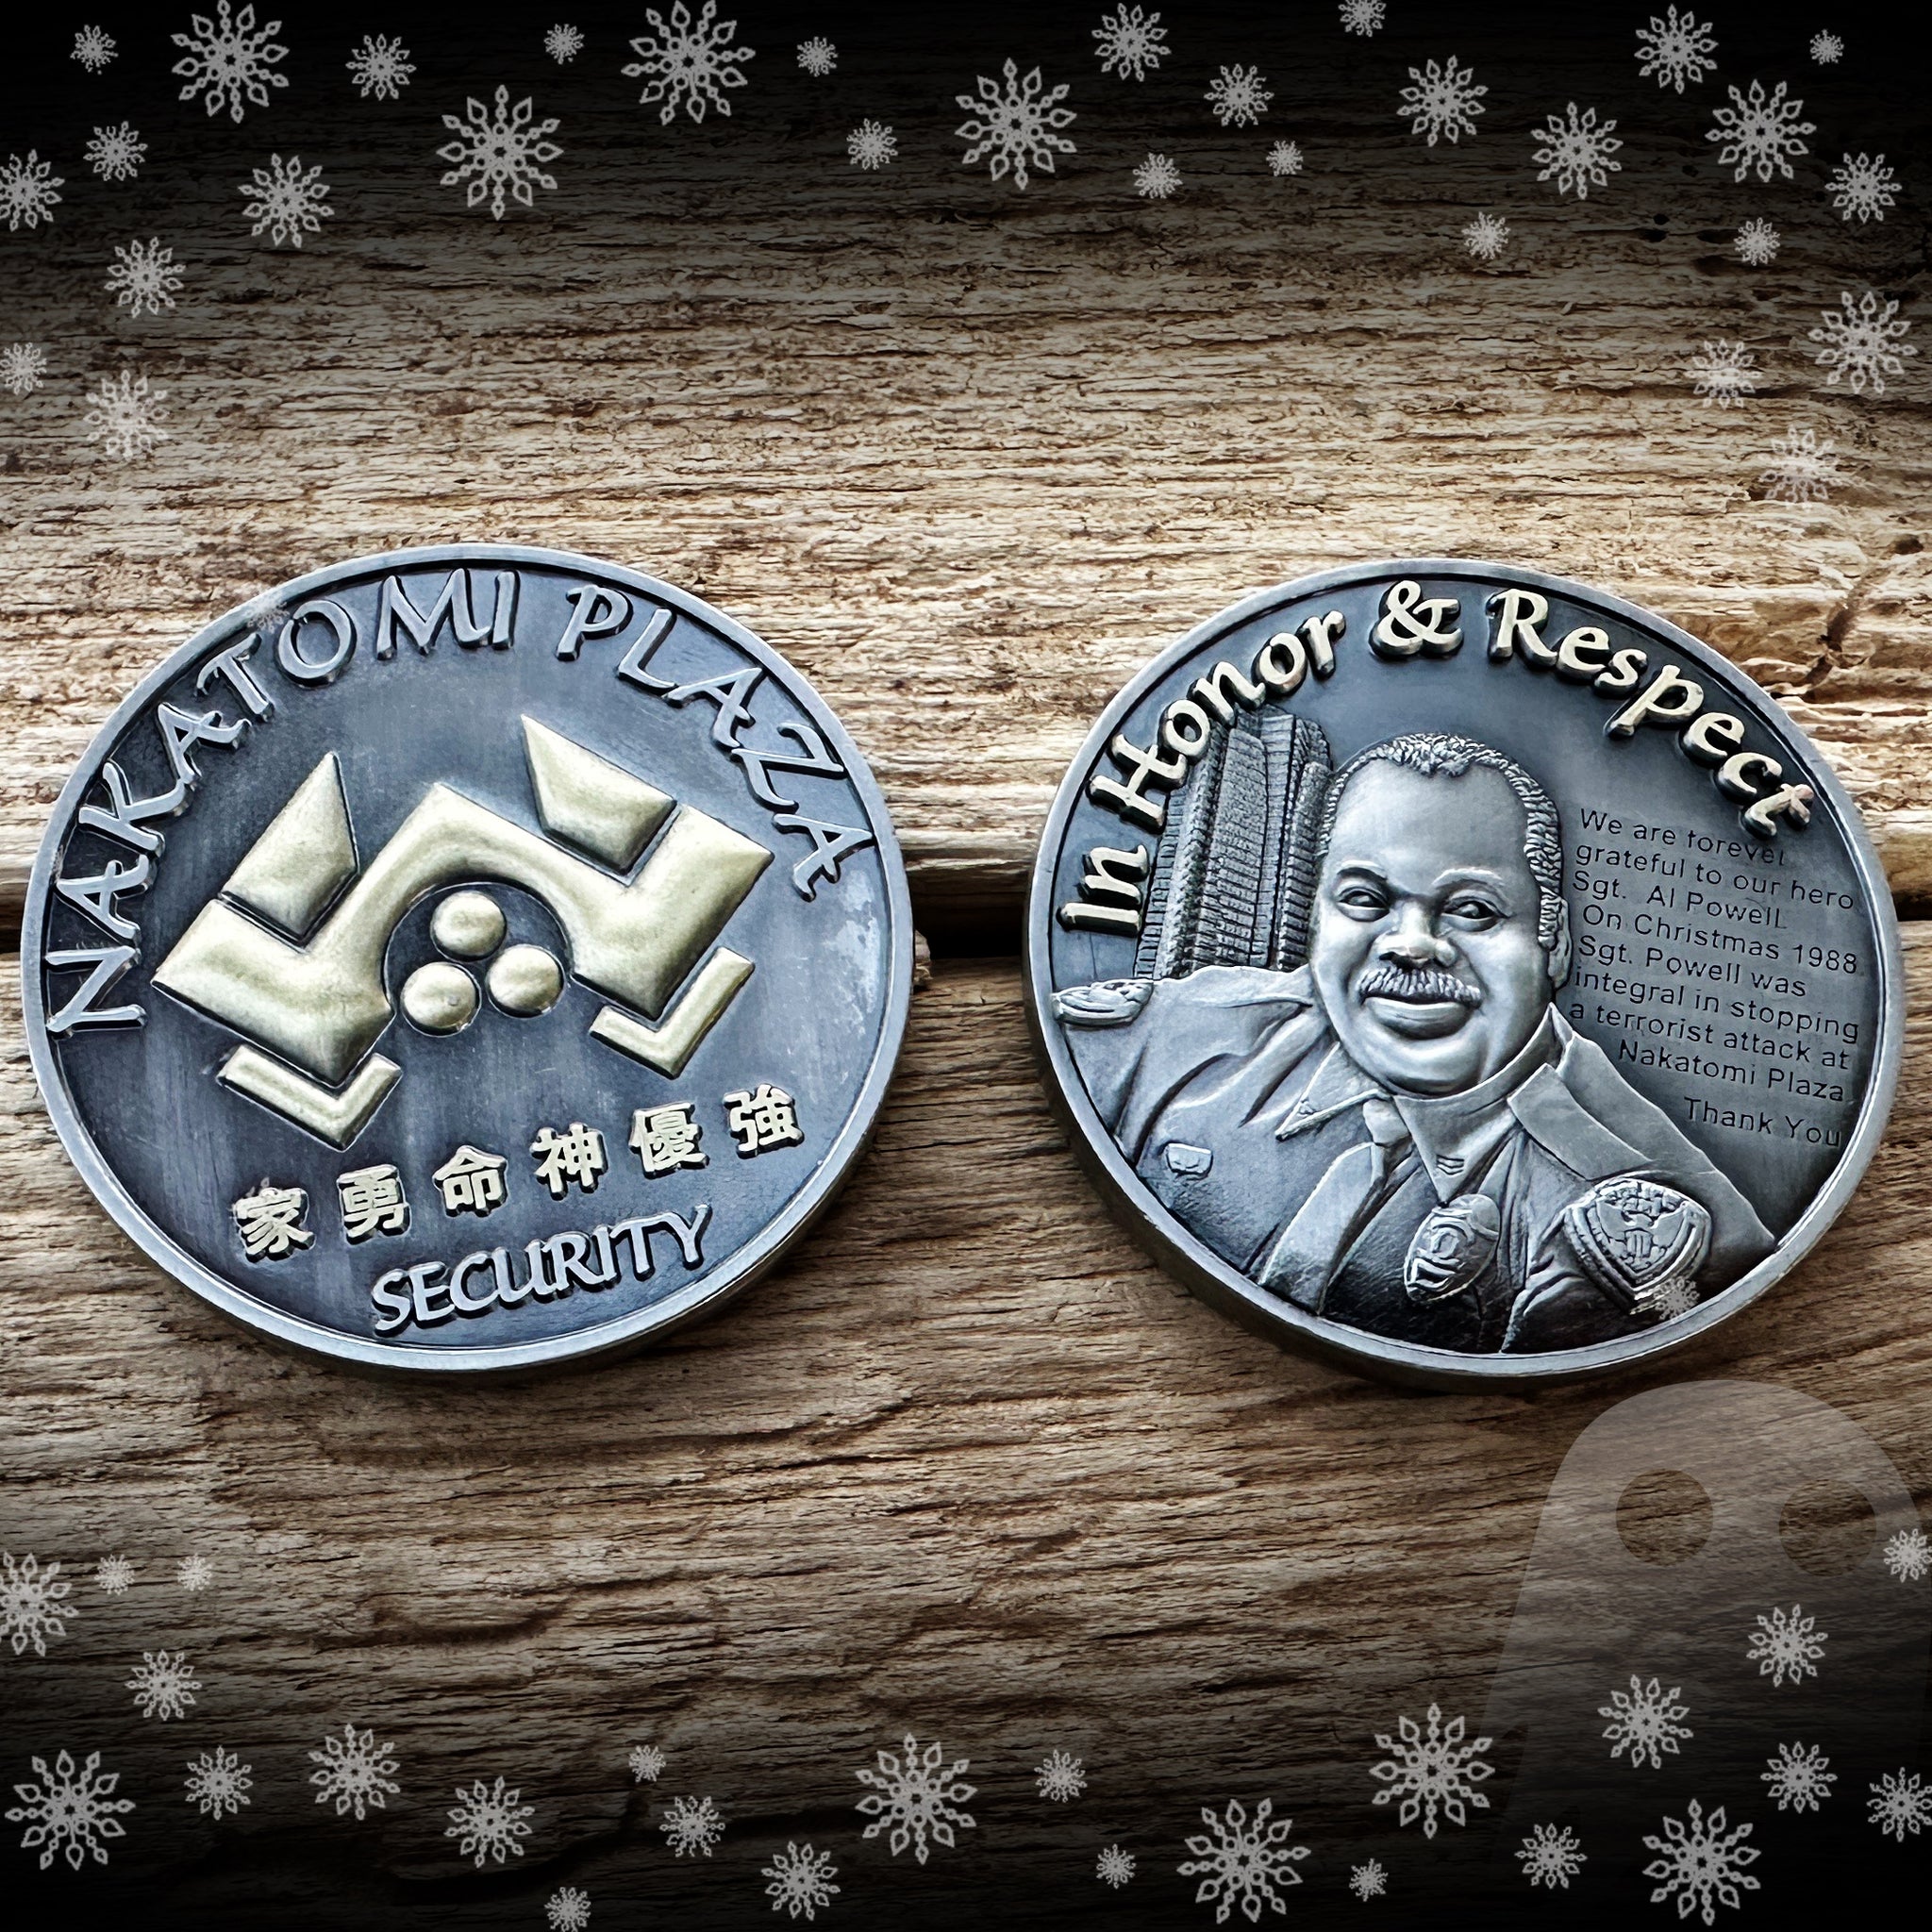 Nakatomi Plaza Security - Sgt Al Powell Coin - Die Hard